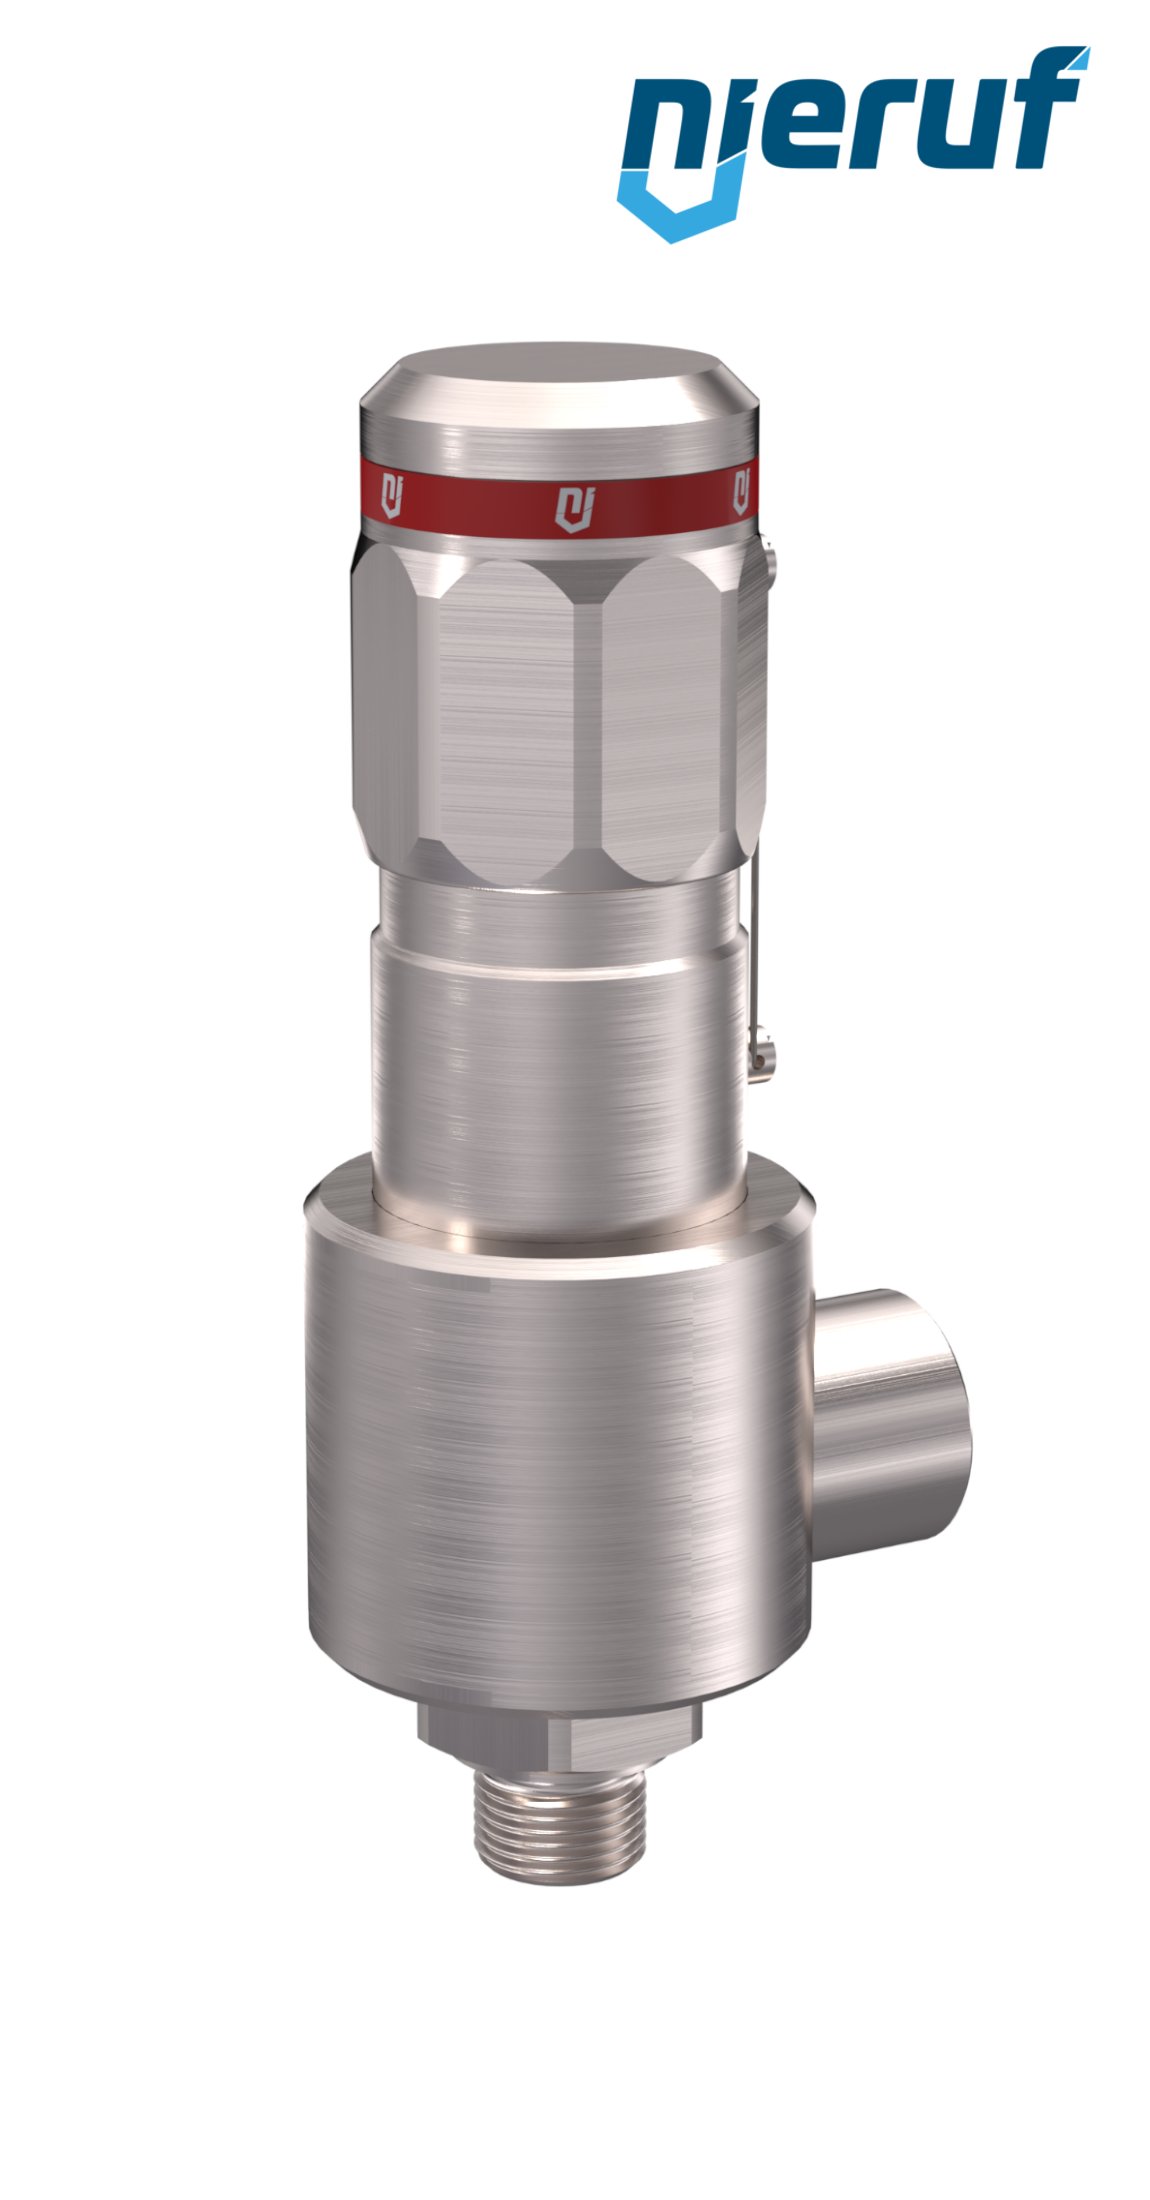 safety-valve DN10 1" m x 1" fm male thread NPT, SV15, MD / PAI, without lifting device, angle-type, >180,0 bar - 350,0 bar